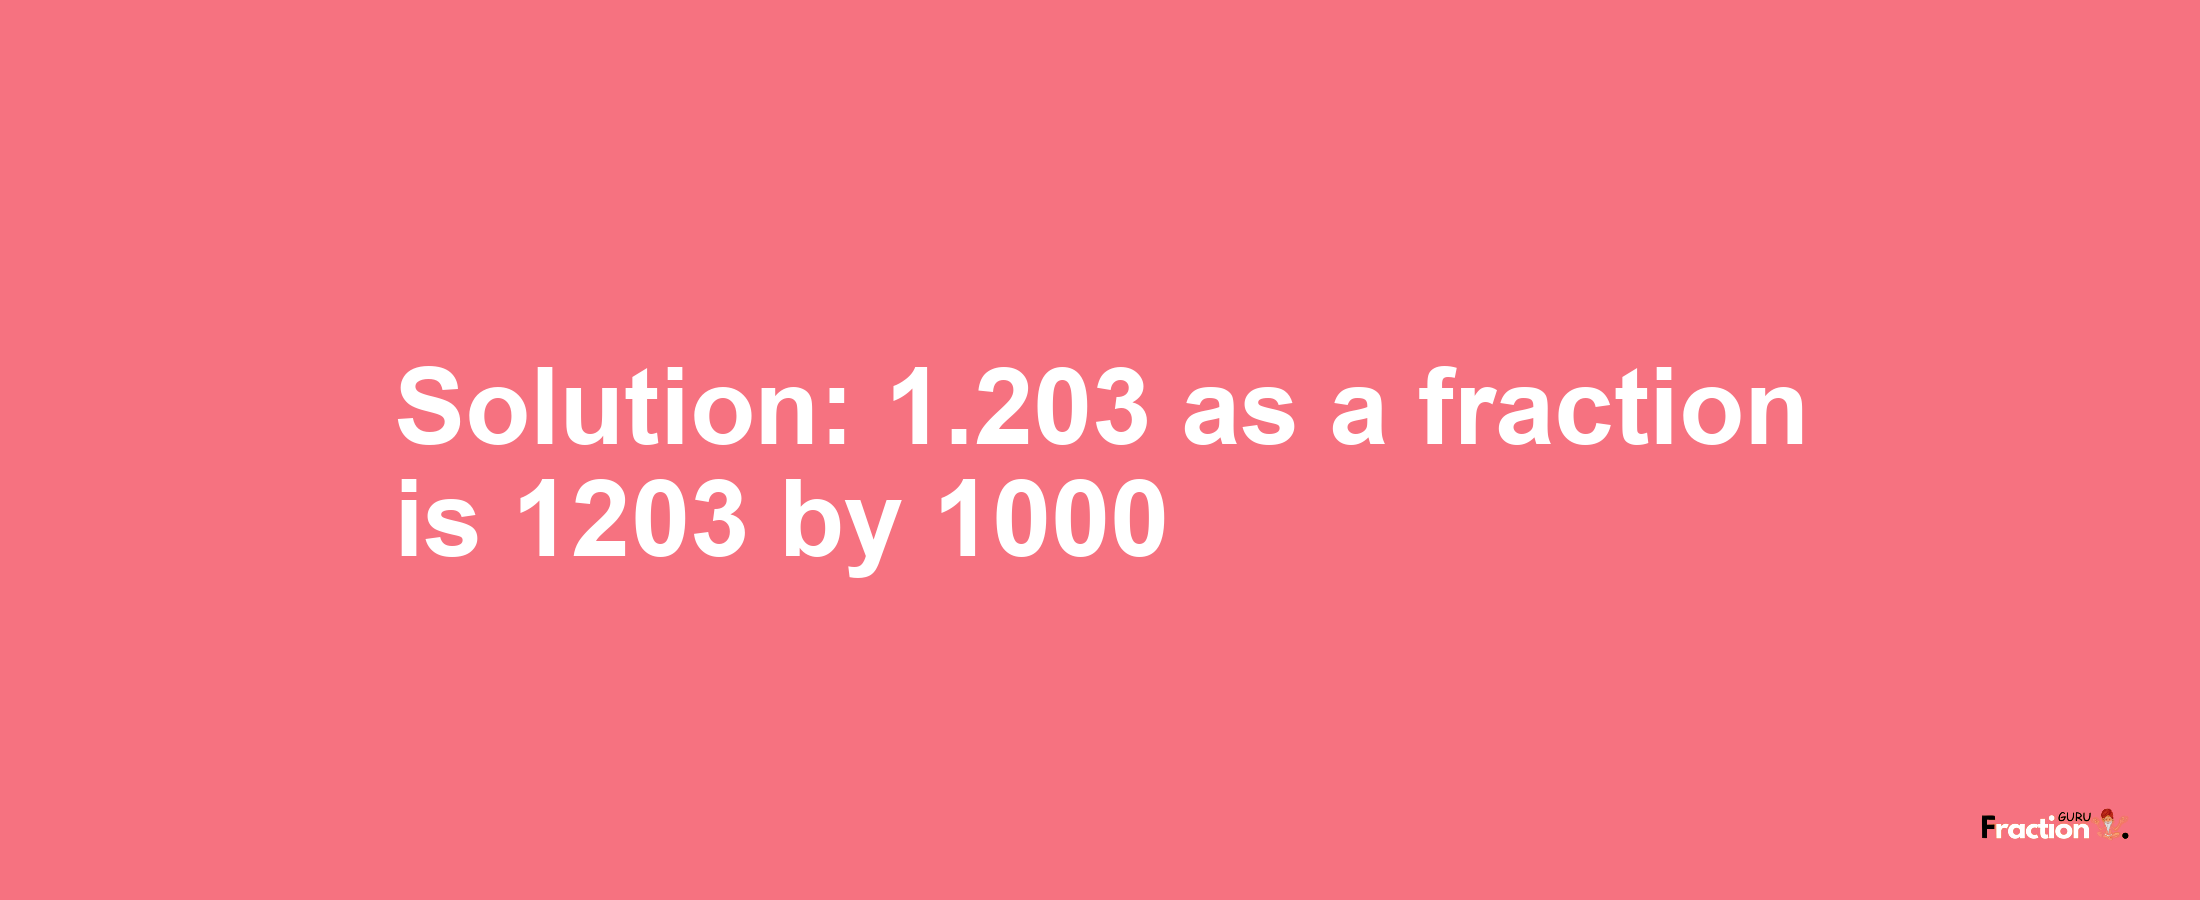 Solution:1.203 as a fraction is 1203/1000